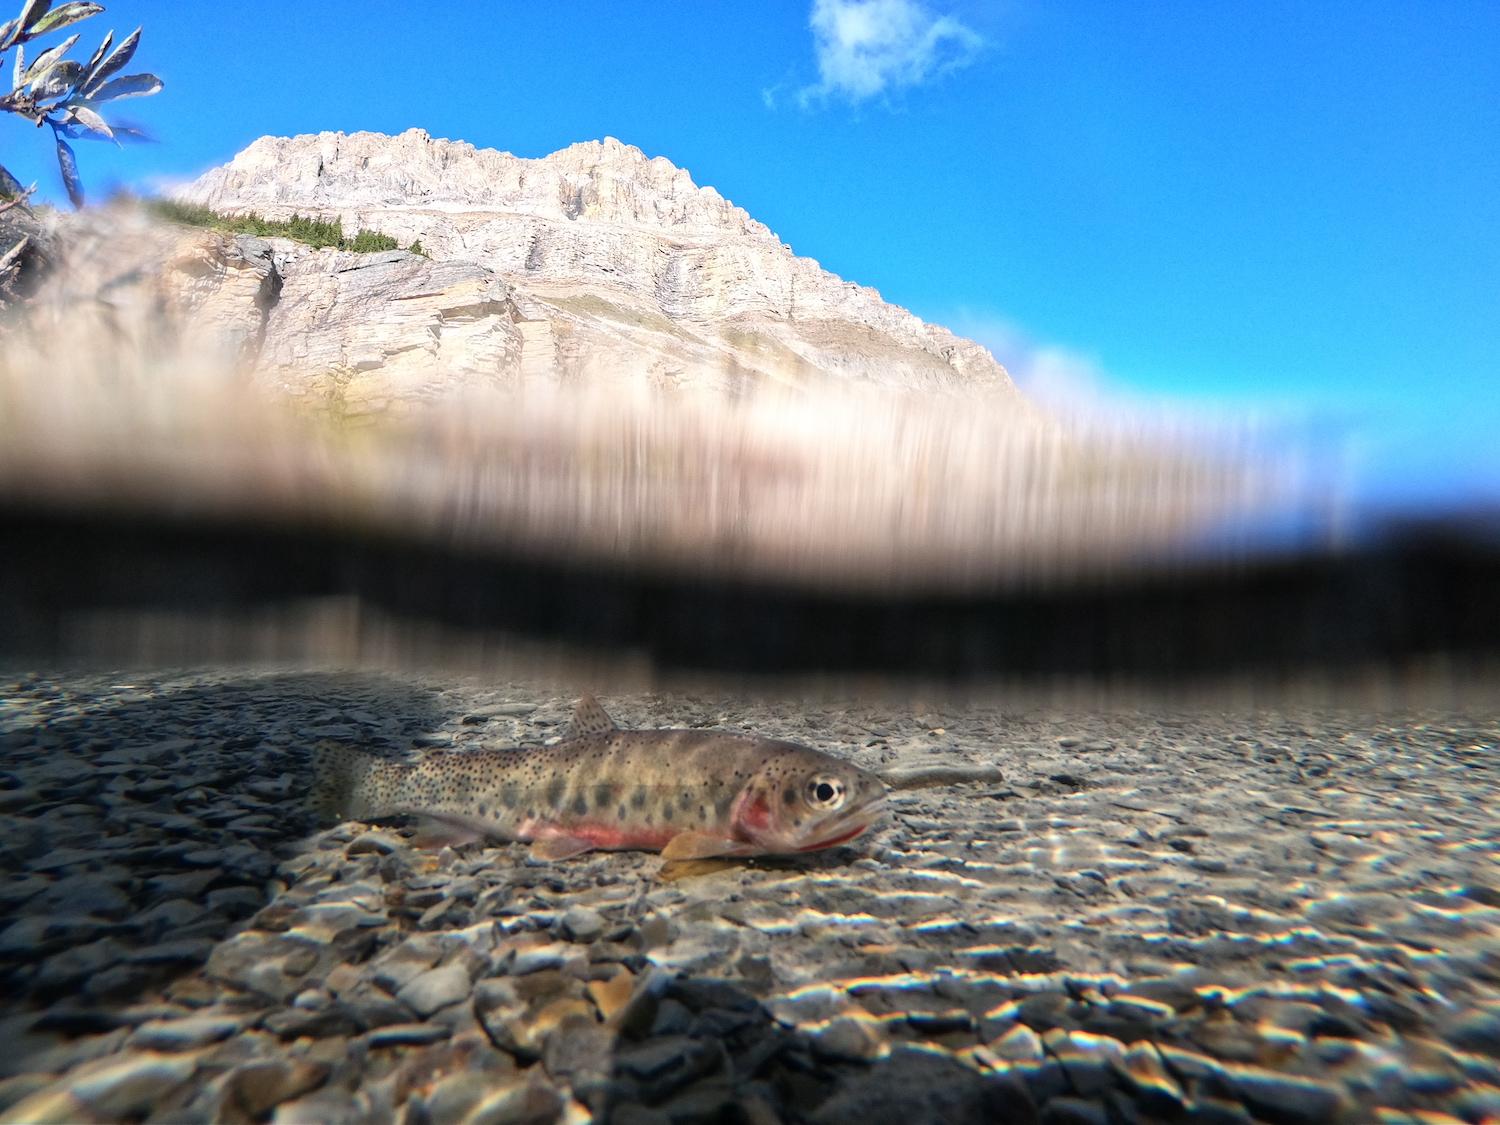 A westslope cutthroat trout is shown under water in Banff National Park.